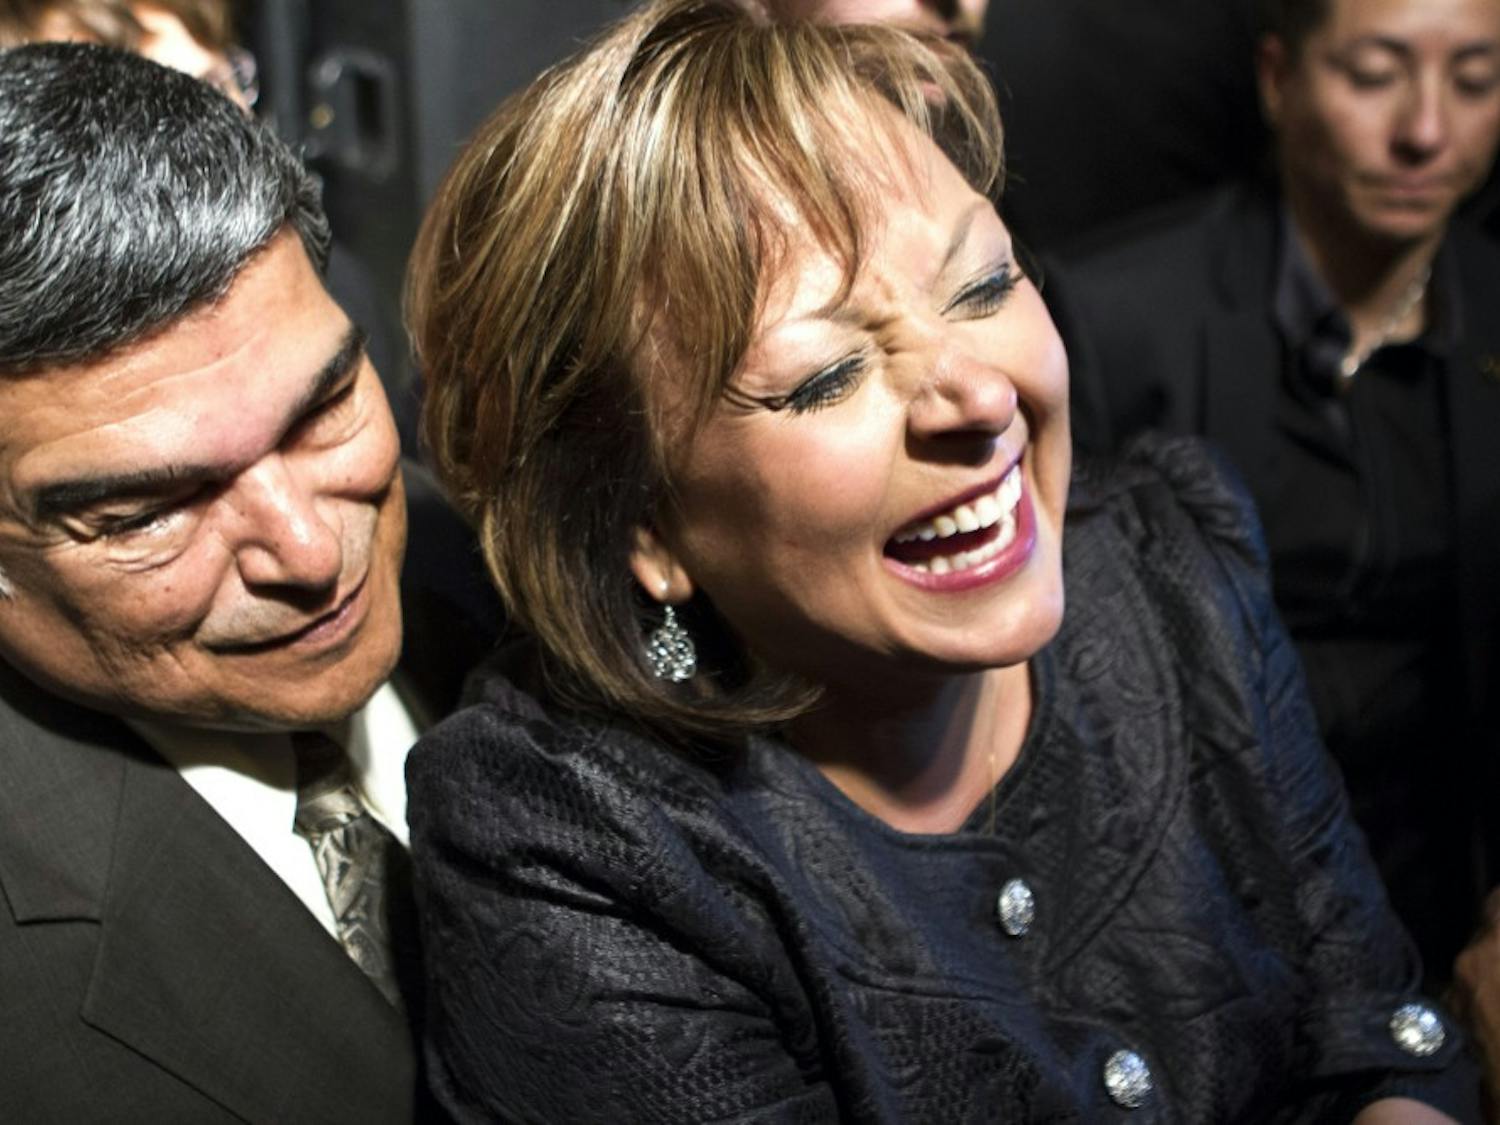 New Mexico governor Susana Martinez, center, greets supporters after her victory speech at the Albuquerque Marriott on Tuesday night. Martinez, a Republican, won re-election after defeating Democrat Gary King.